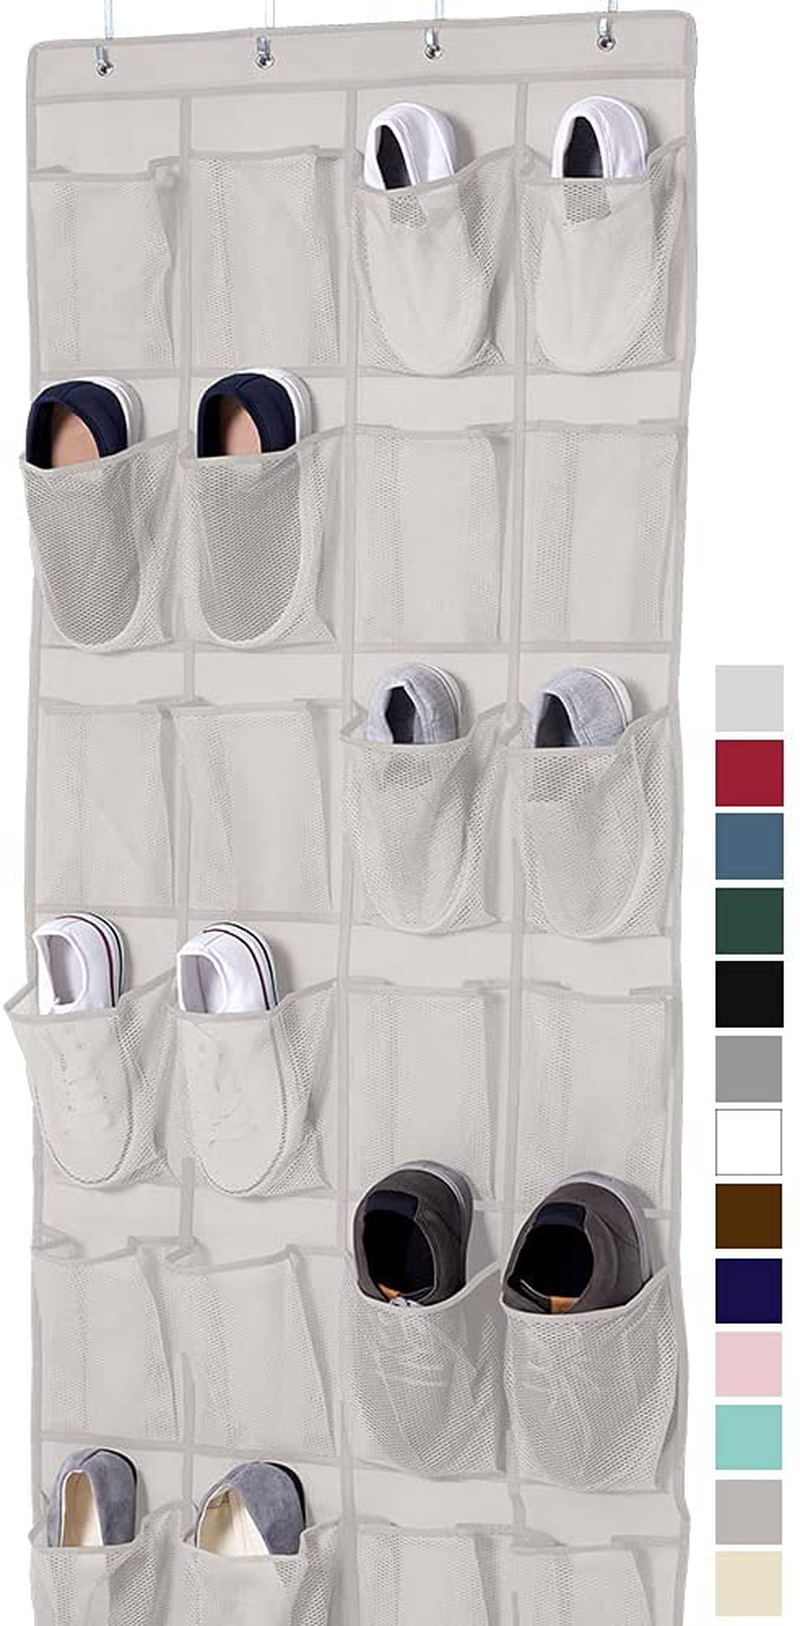 Gorilla Grip Large 24 Pocket Shoe Organizer, Breathable Mesh, Holds Up to 40 Pounds, Sturdy Hooks, Space Saving, Over Door, Storage Rack Hangs on Closets for Shoes, Sneakers or Home Accessories, Linen